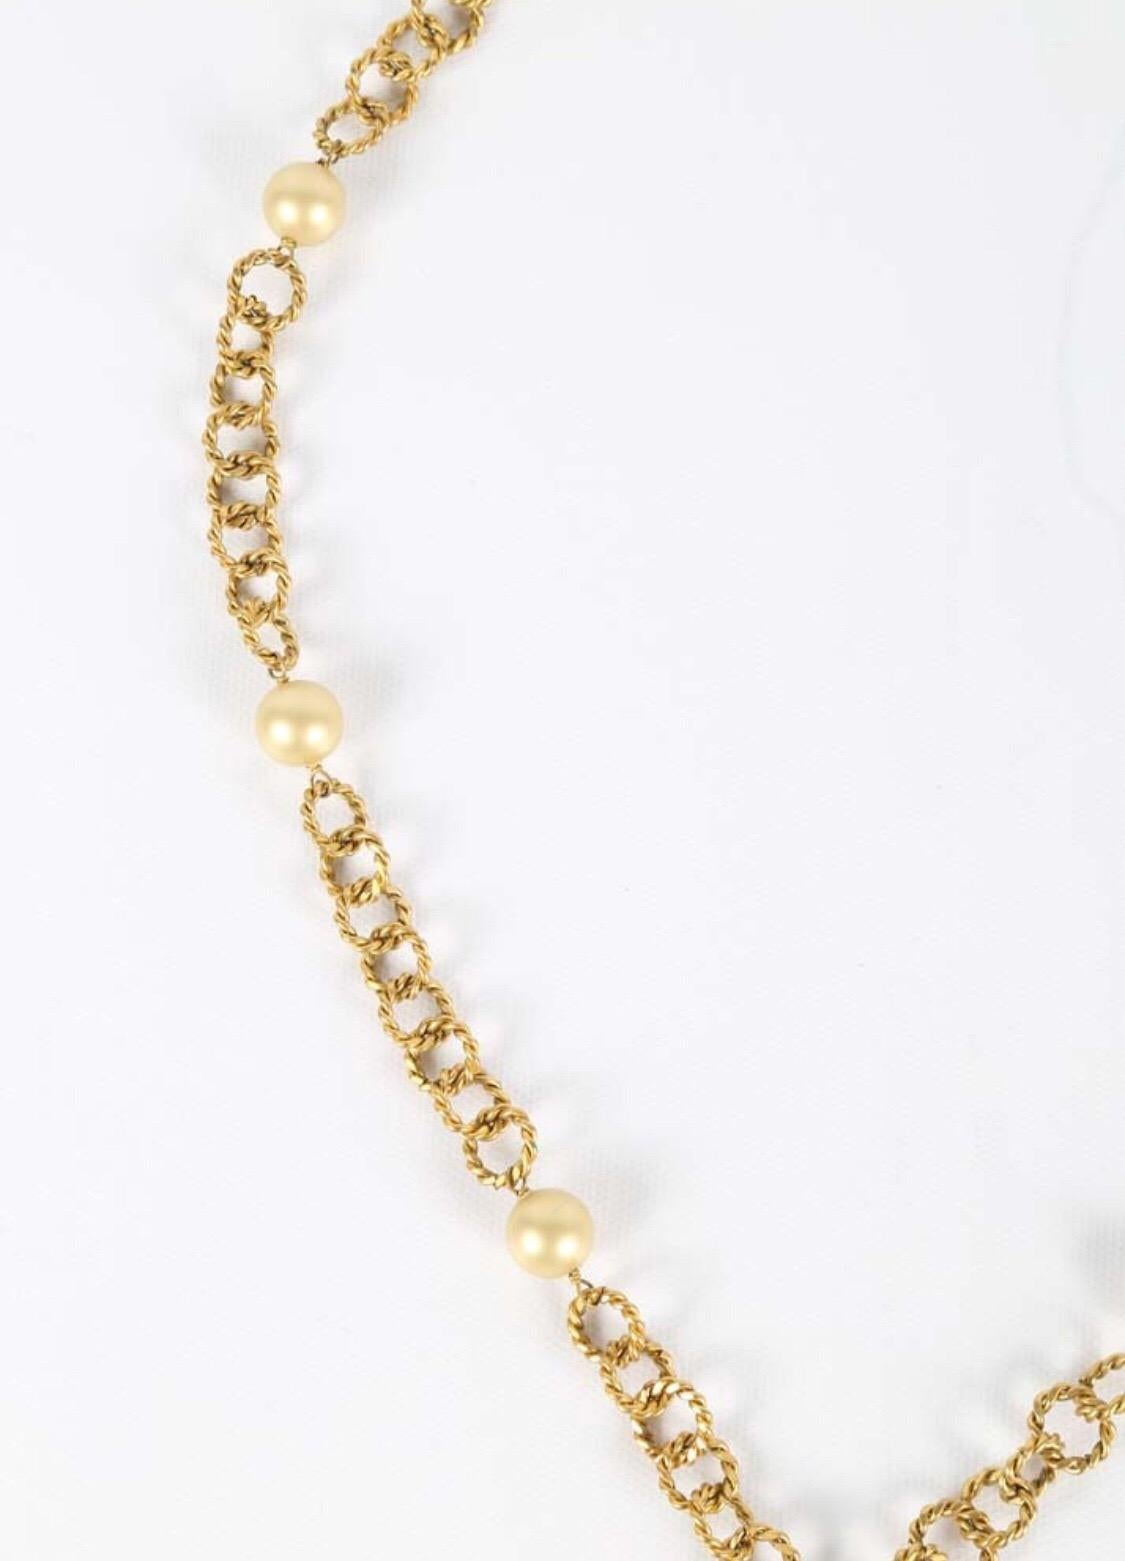 Chanel Gripoix Pendent Necklace with Pearls, 1980s 1